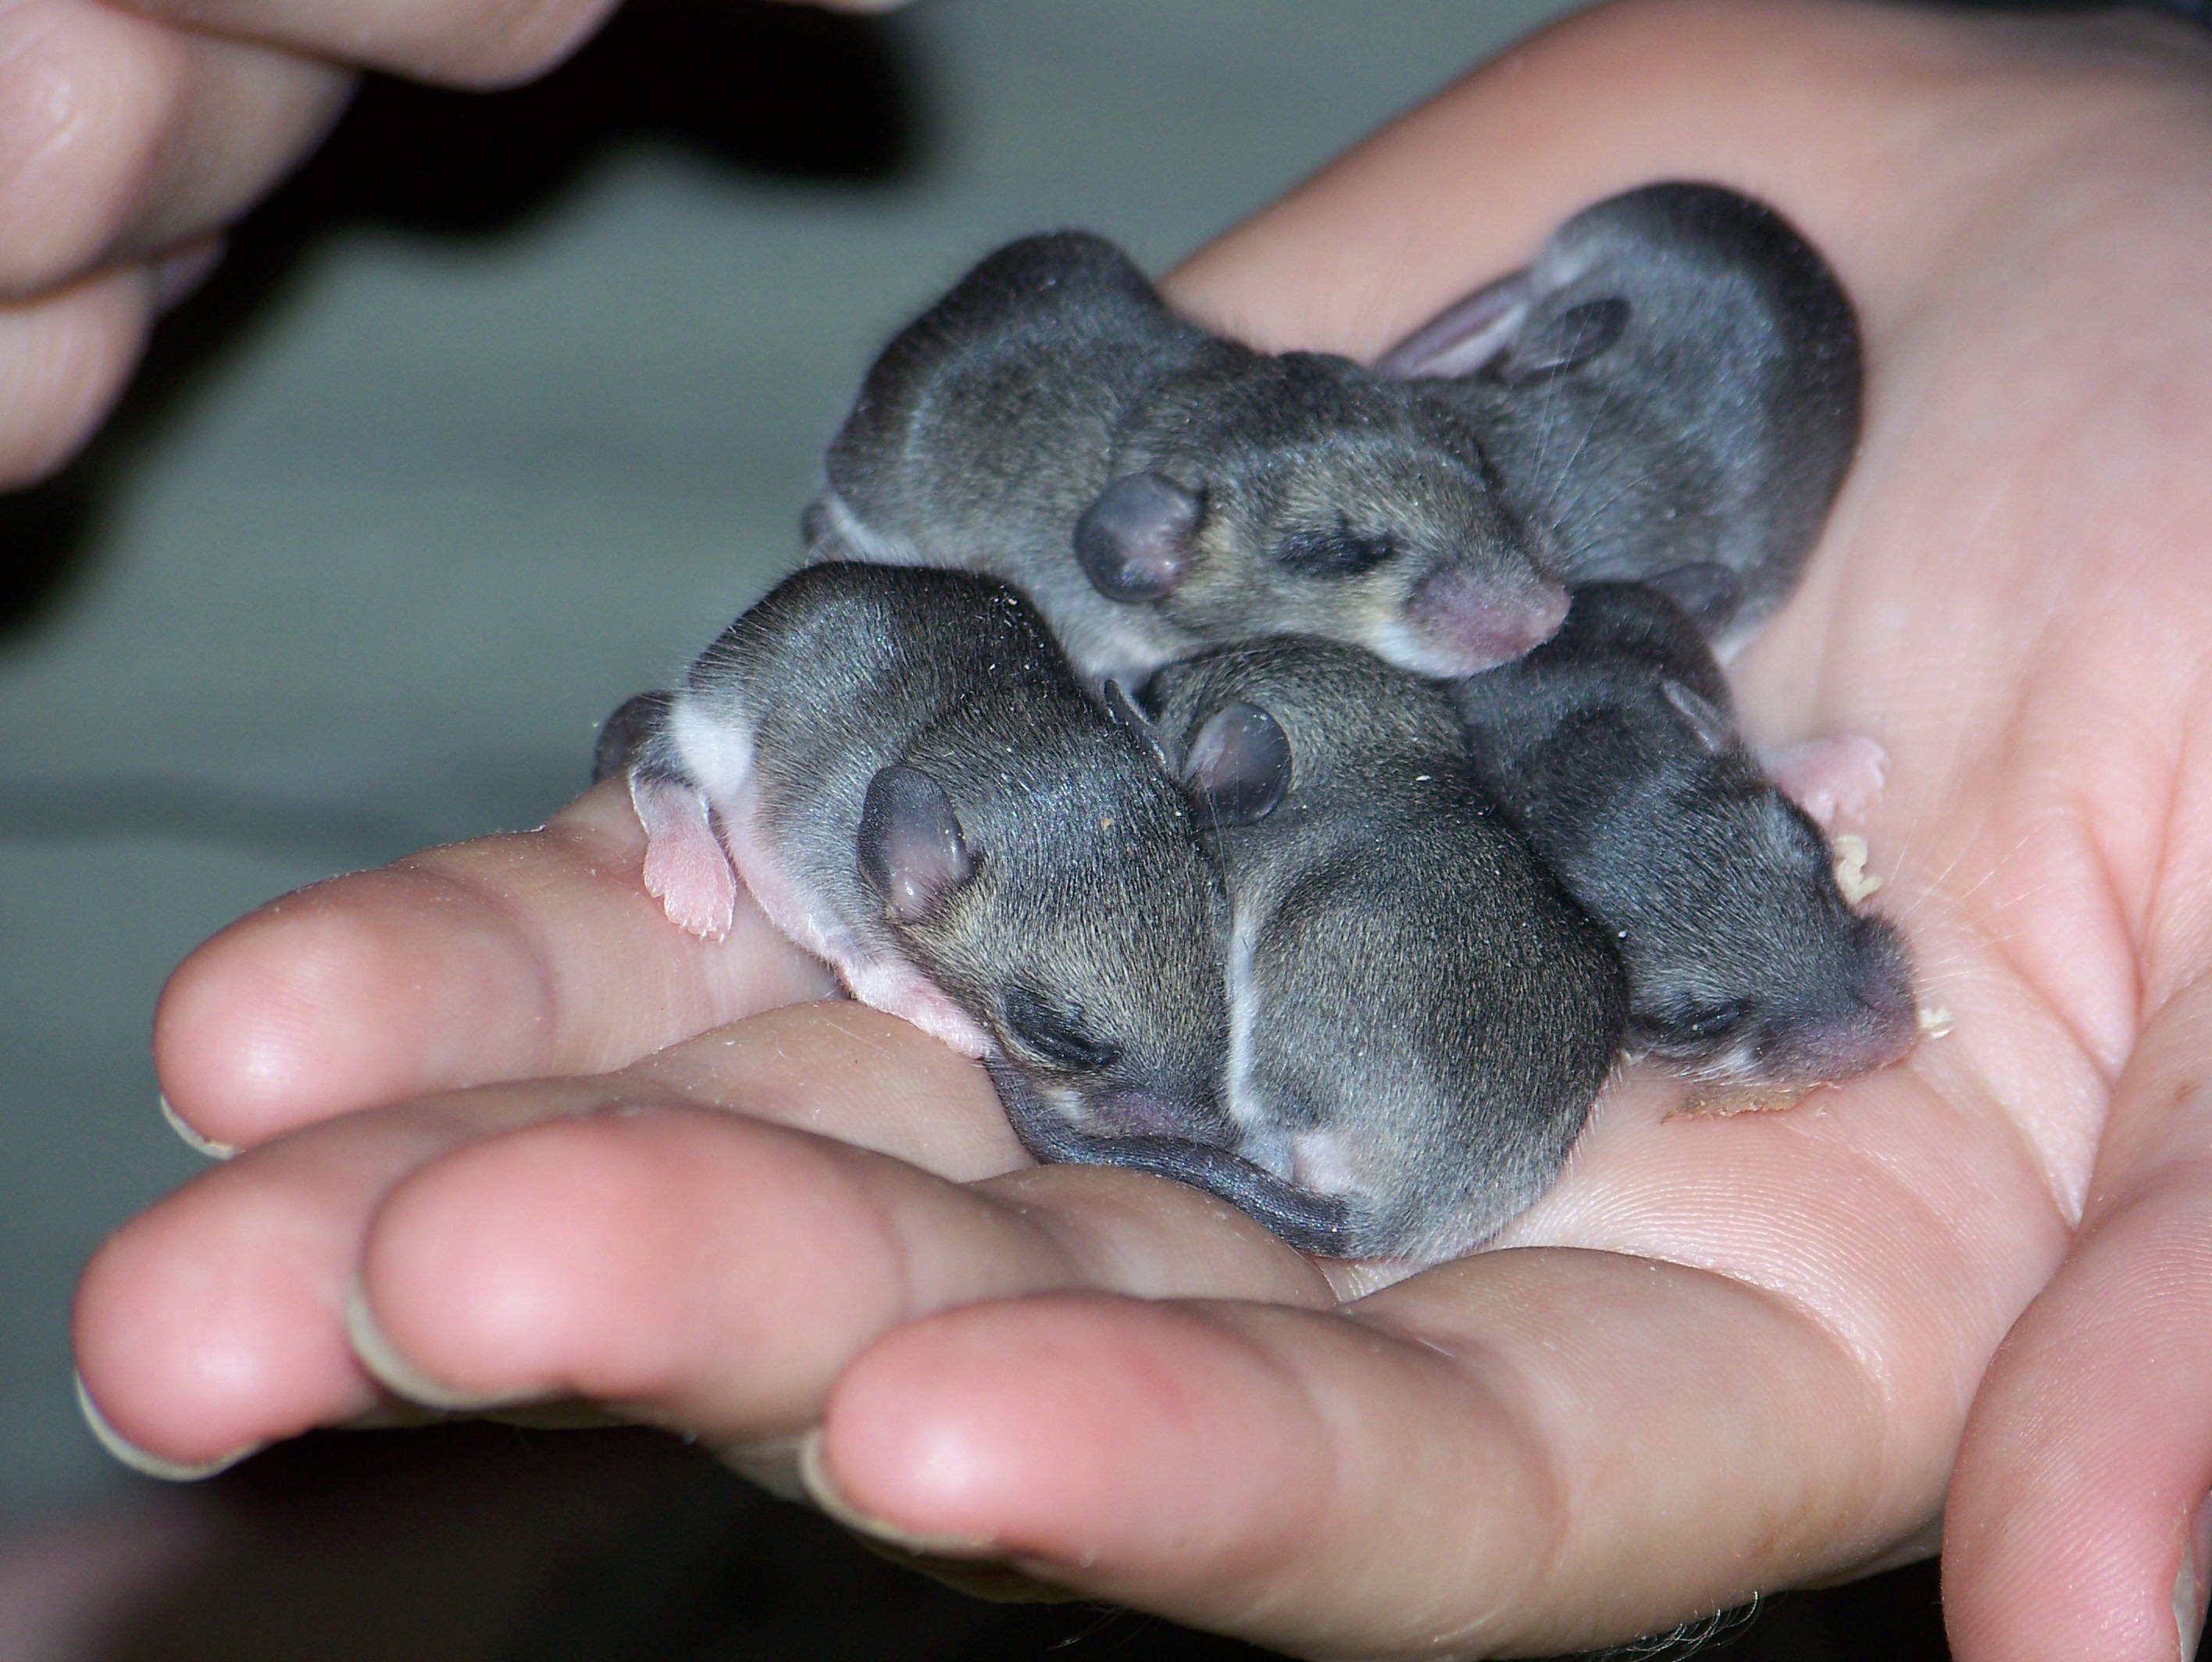 What Do Baby Mice Look Like? 